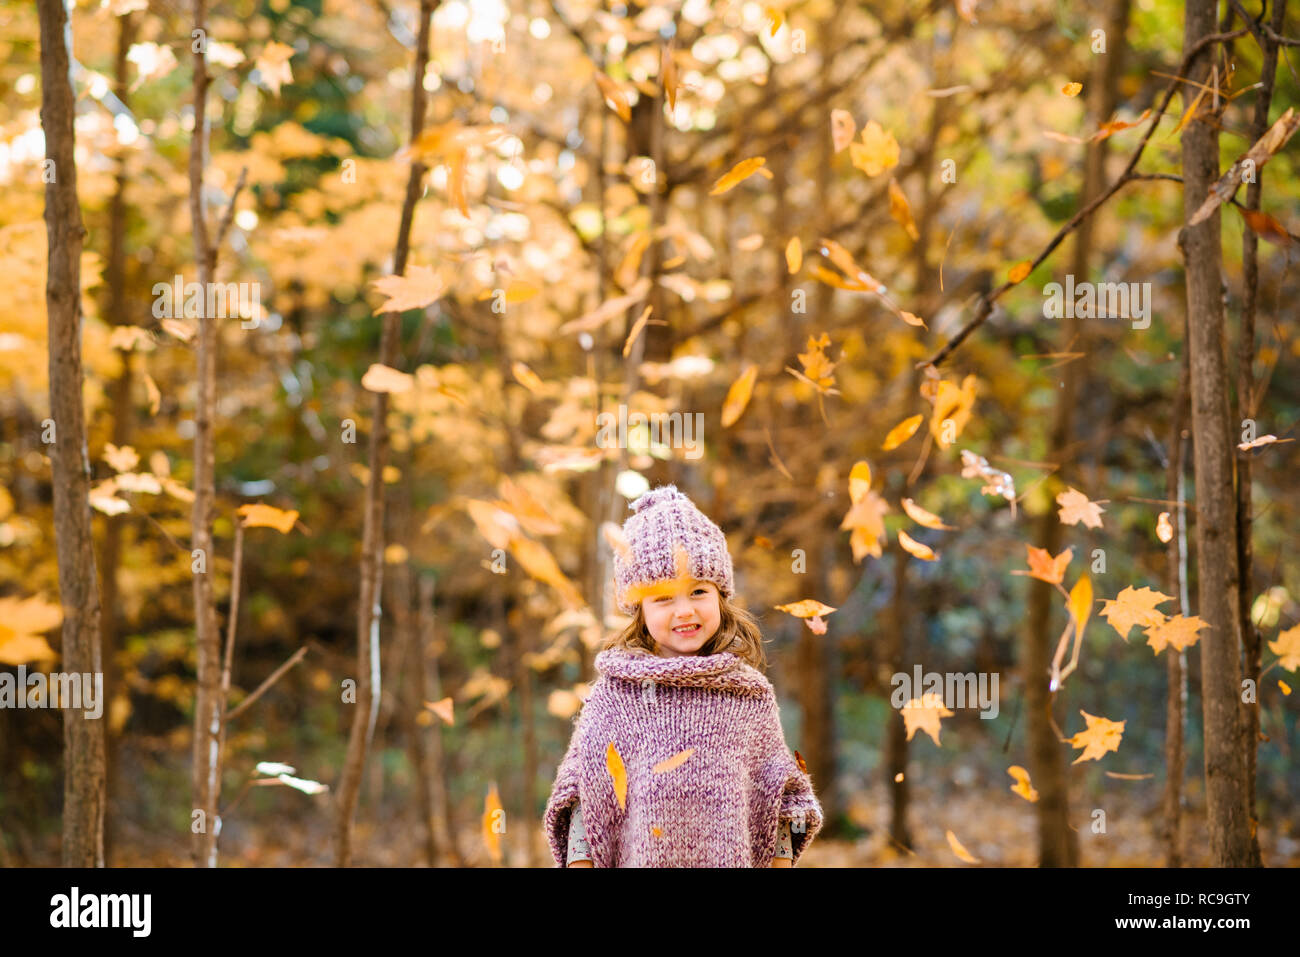 Falling autumn leaves in front of little girl in forest Stock Photo